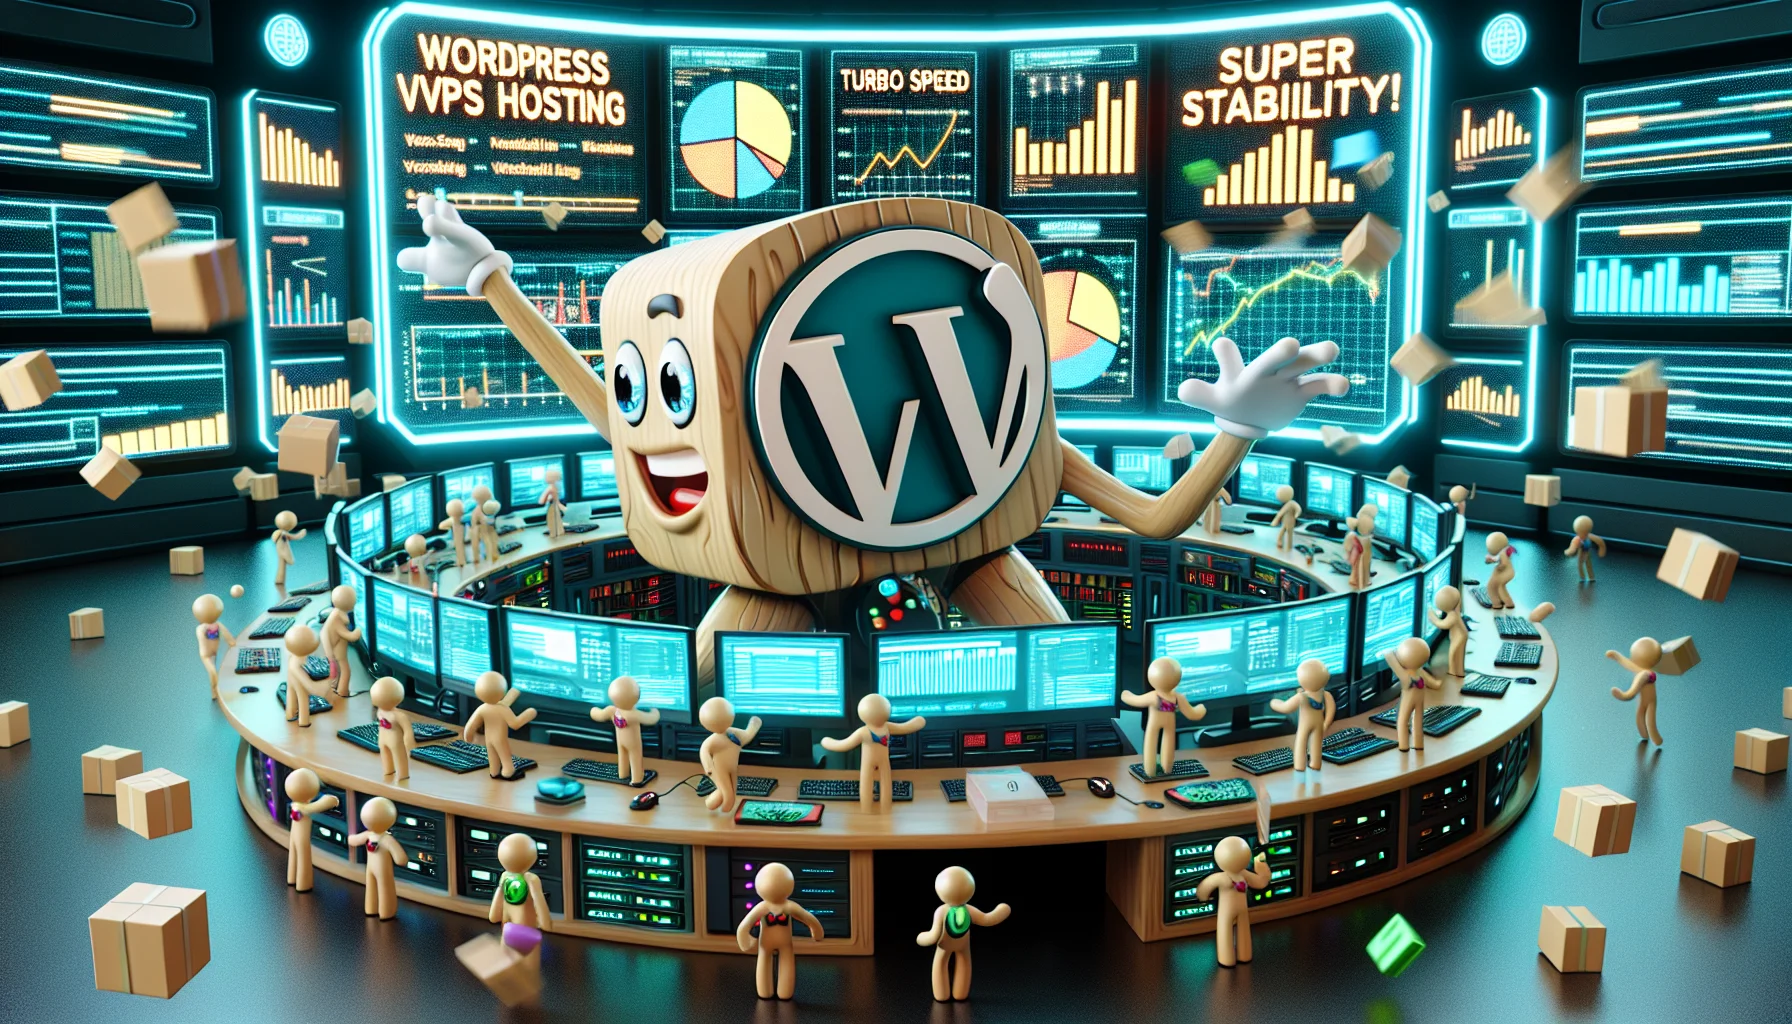 A humorously exaggerated scenario of WordPress VPS hosting. An anthropomorphized WordPress logo, depicted as a friendly, approachable character, is hard at work at a futuristic control center teeming with several hi-tech screens rendering bar graphs, pie charts, and data packets flying in the cyberspace. It is feverishly toggling switches, pressing buttons, playfully juggling data packets. On the screens, 'visitors' symbolized by miniature, cheerful humanoid icons are efficiently being directed to various 'virtual servers', represented as shiny, high-rise digital towers. A big neon sign beams 'TURBO speed, SUPER stability - Welcome to WordPress VPS Hosting!'